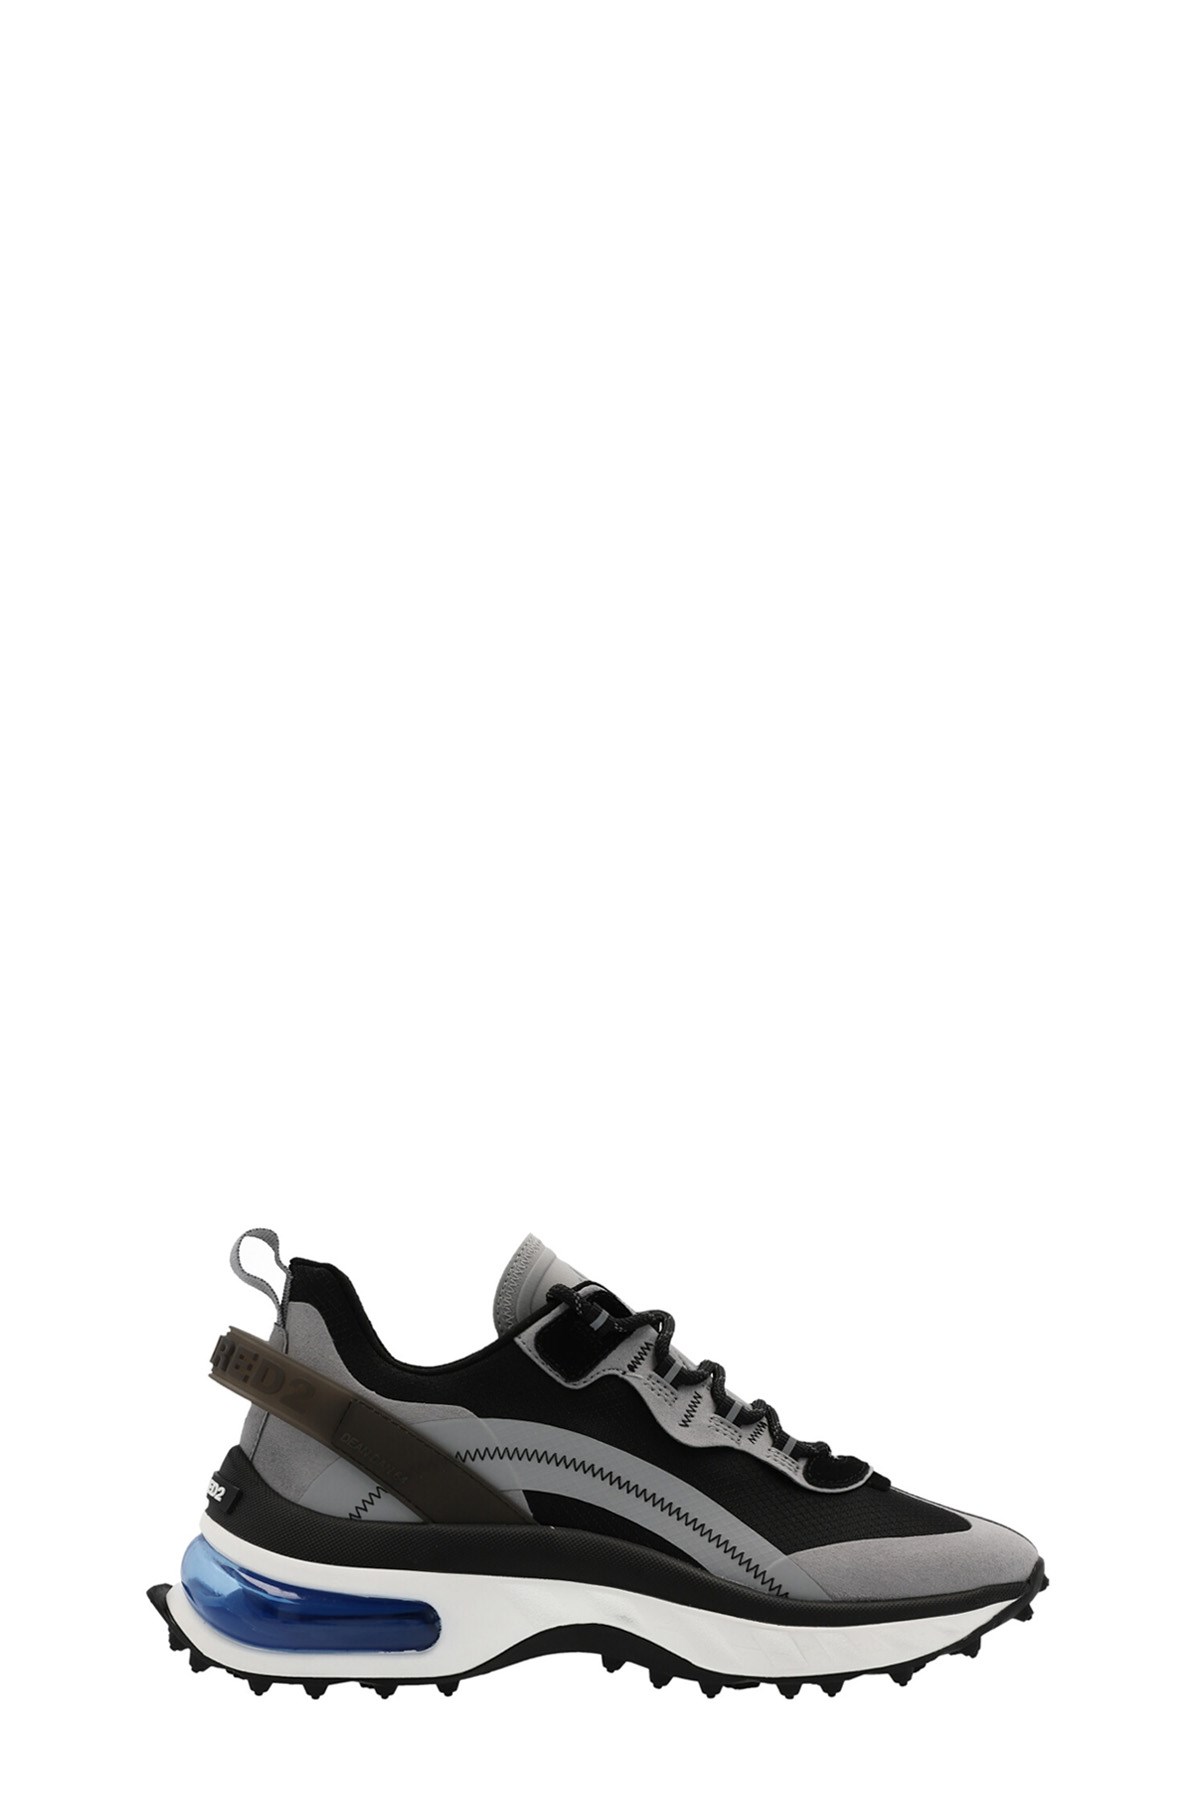 DSQUARED2 'Bubble’ Sneakers